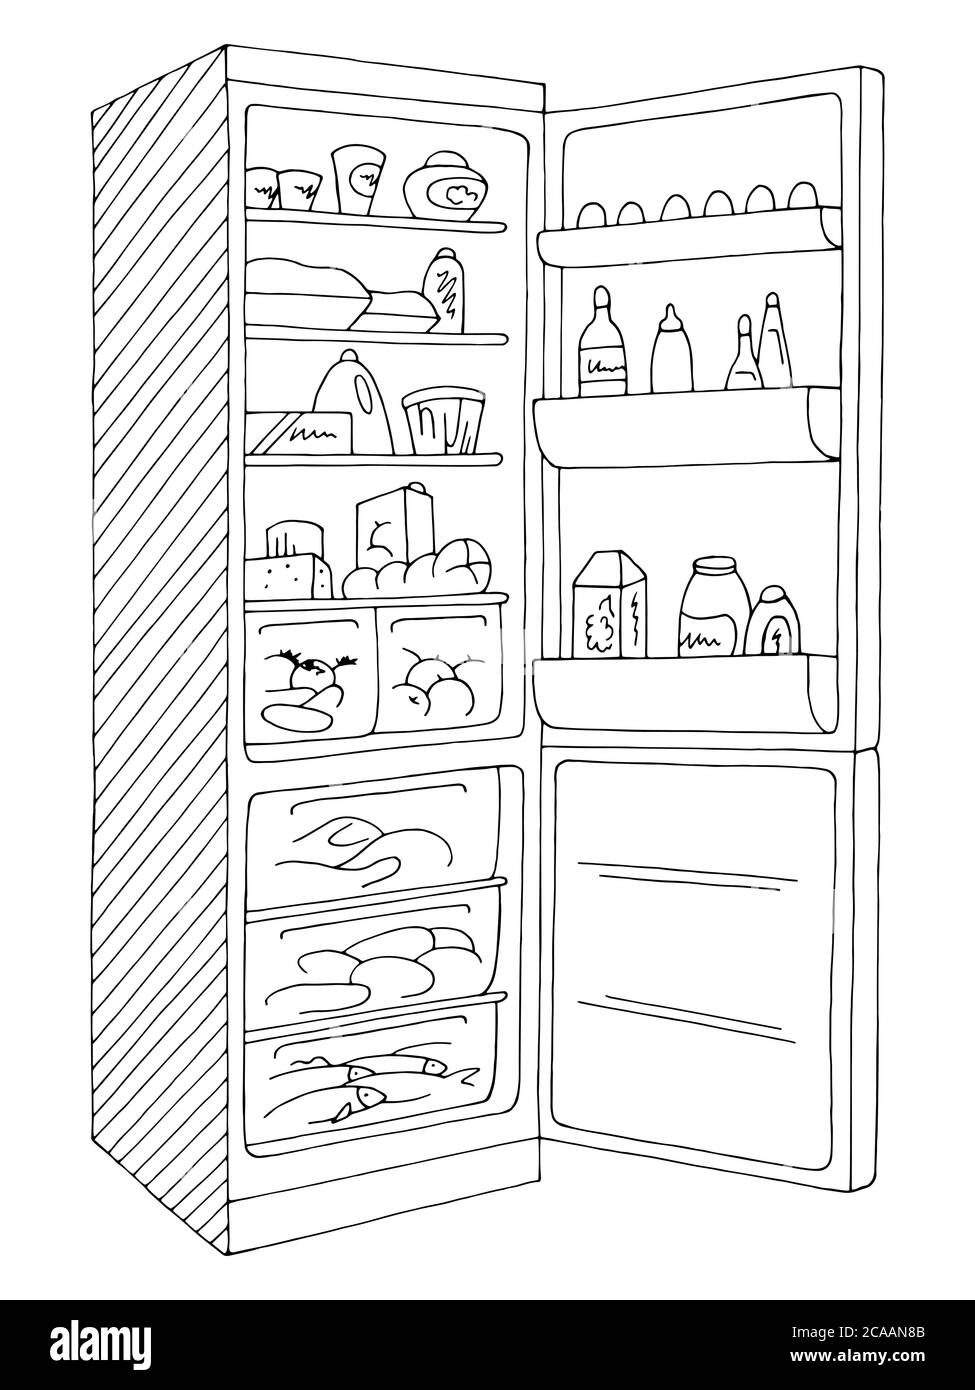 Refrigerator open graphic isolated black white sketch illustration vector Stock Vector